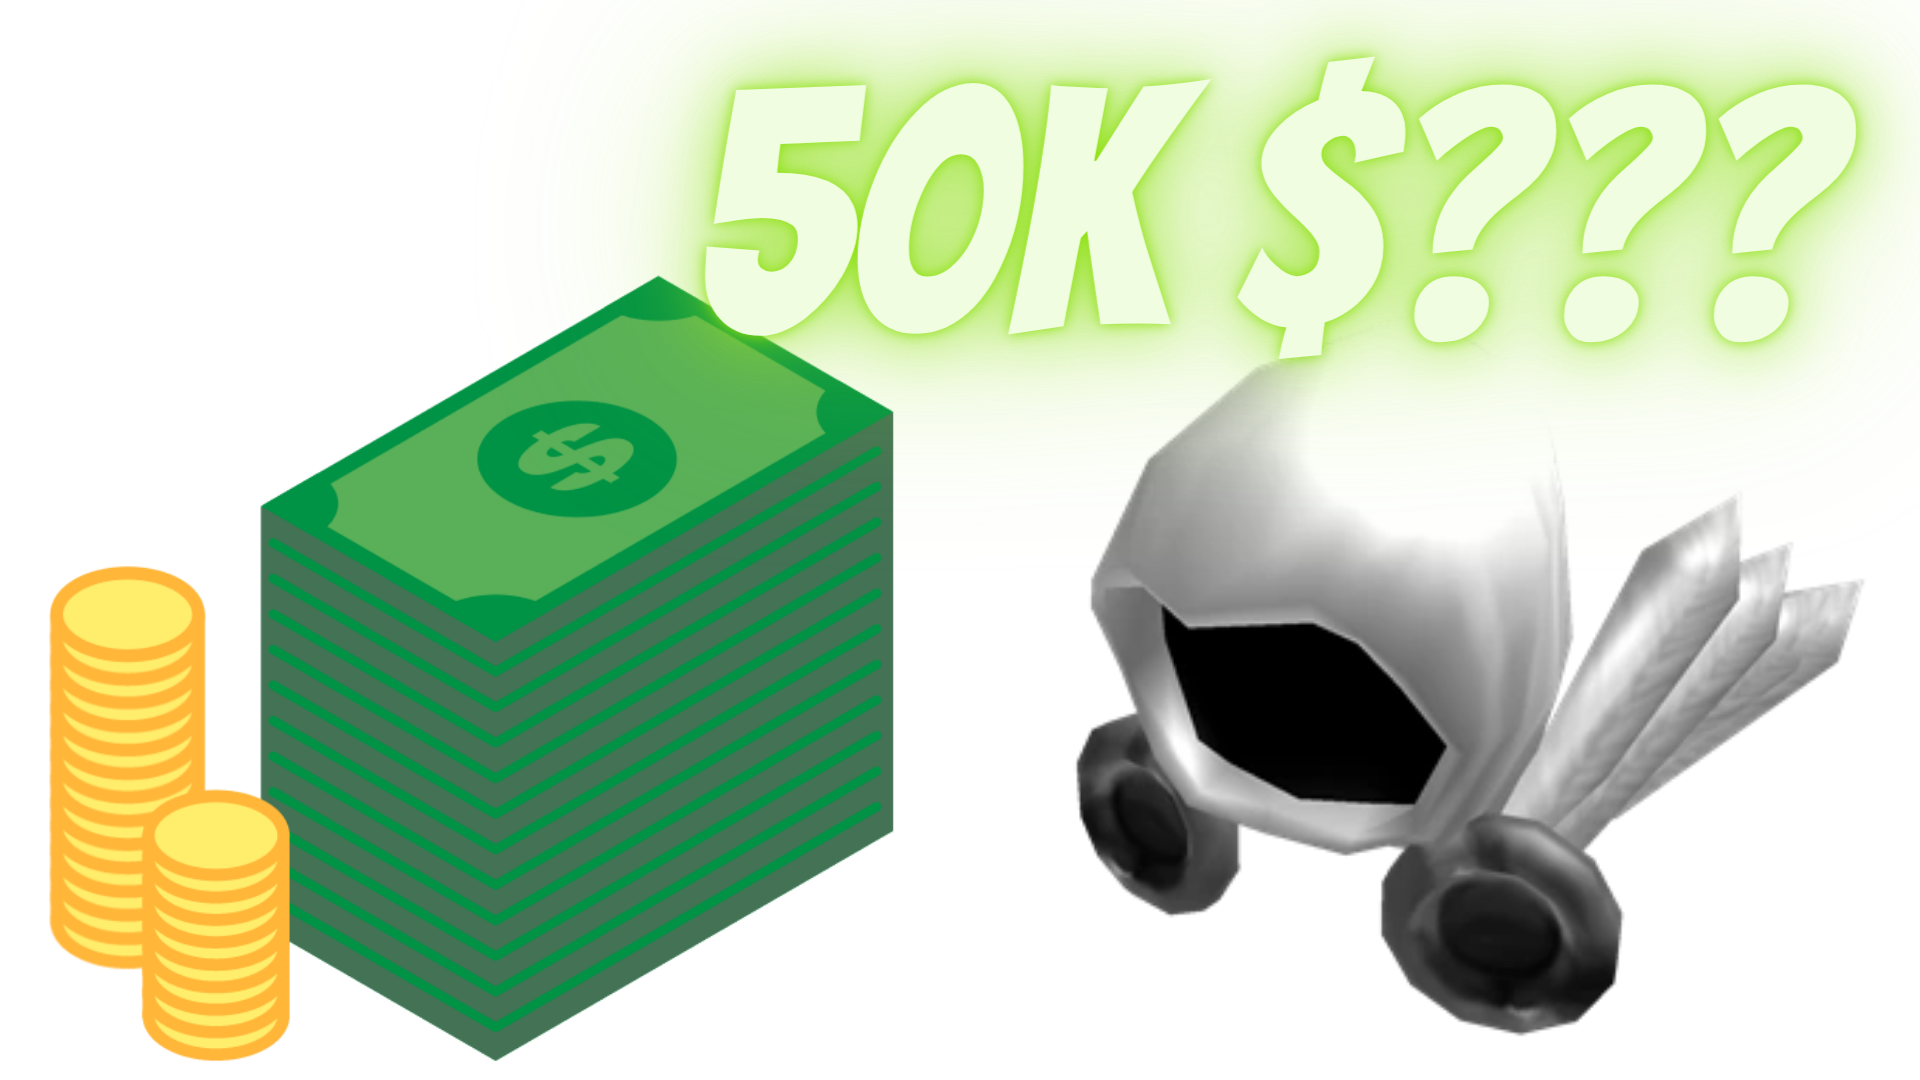 BUYING THE MOST EXPENSIVE ITEM IN ROBLOX? 